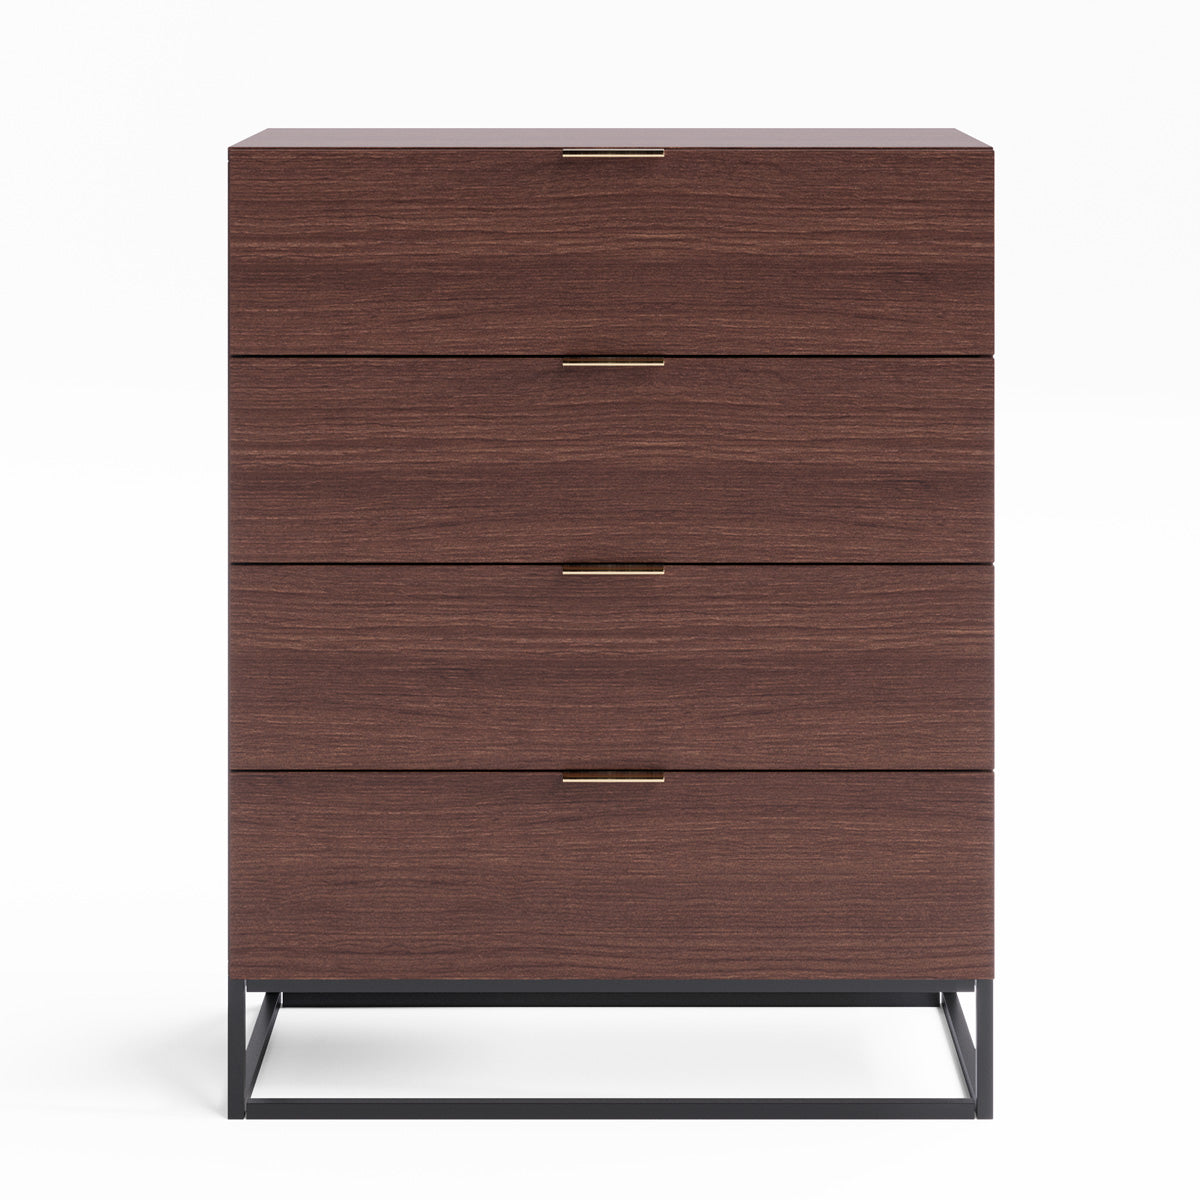 Walnut Four Drawer Tallboy Unit With Metal Base (Darcy Collection)